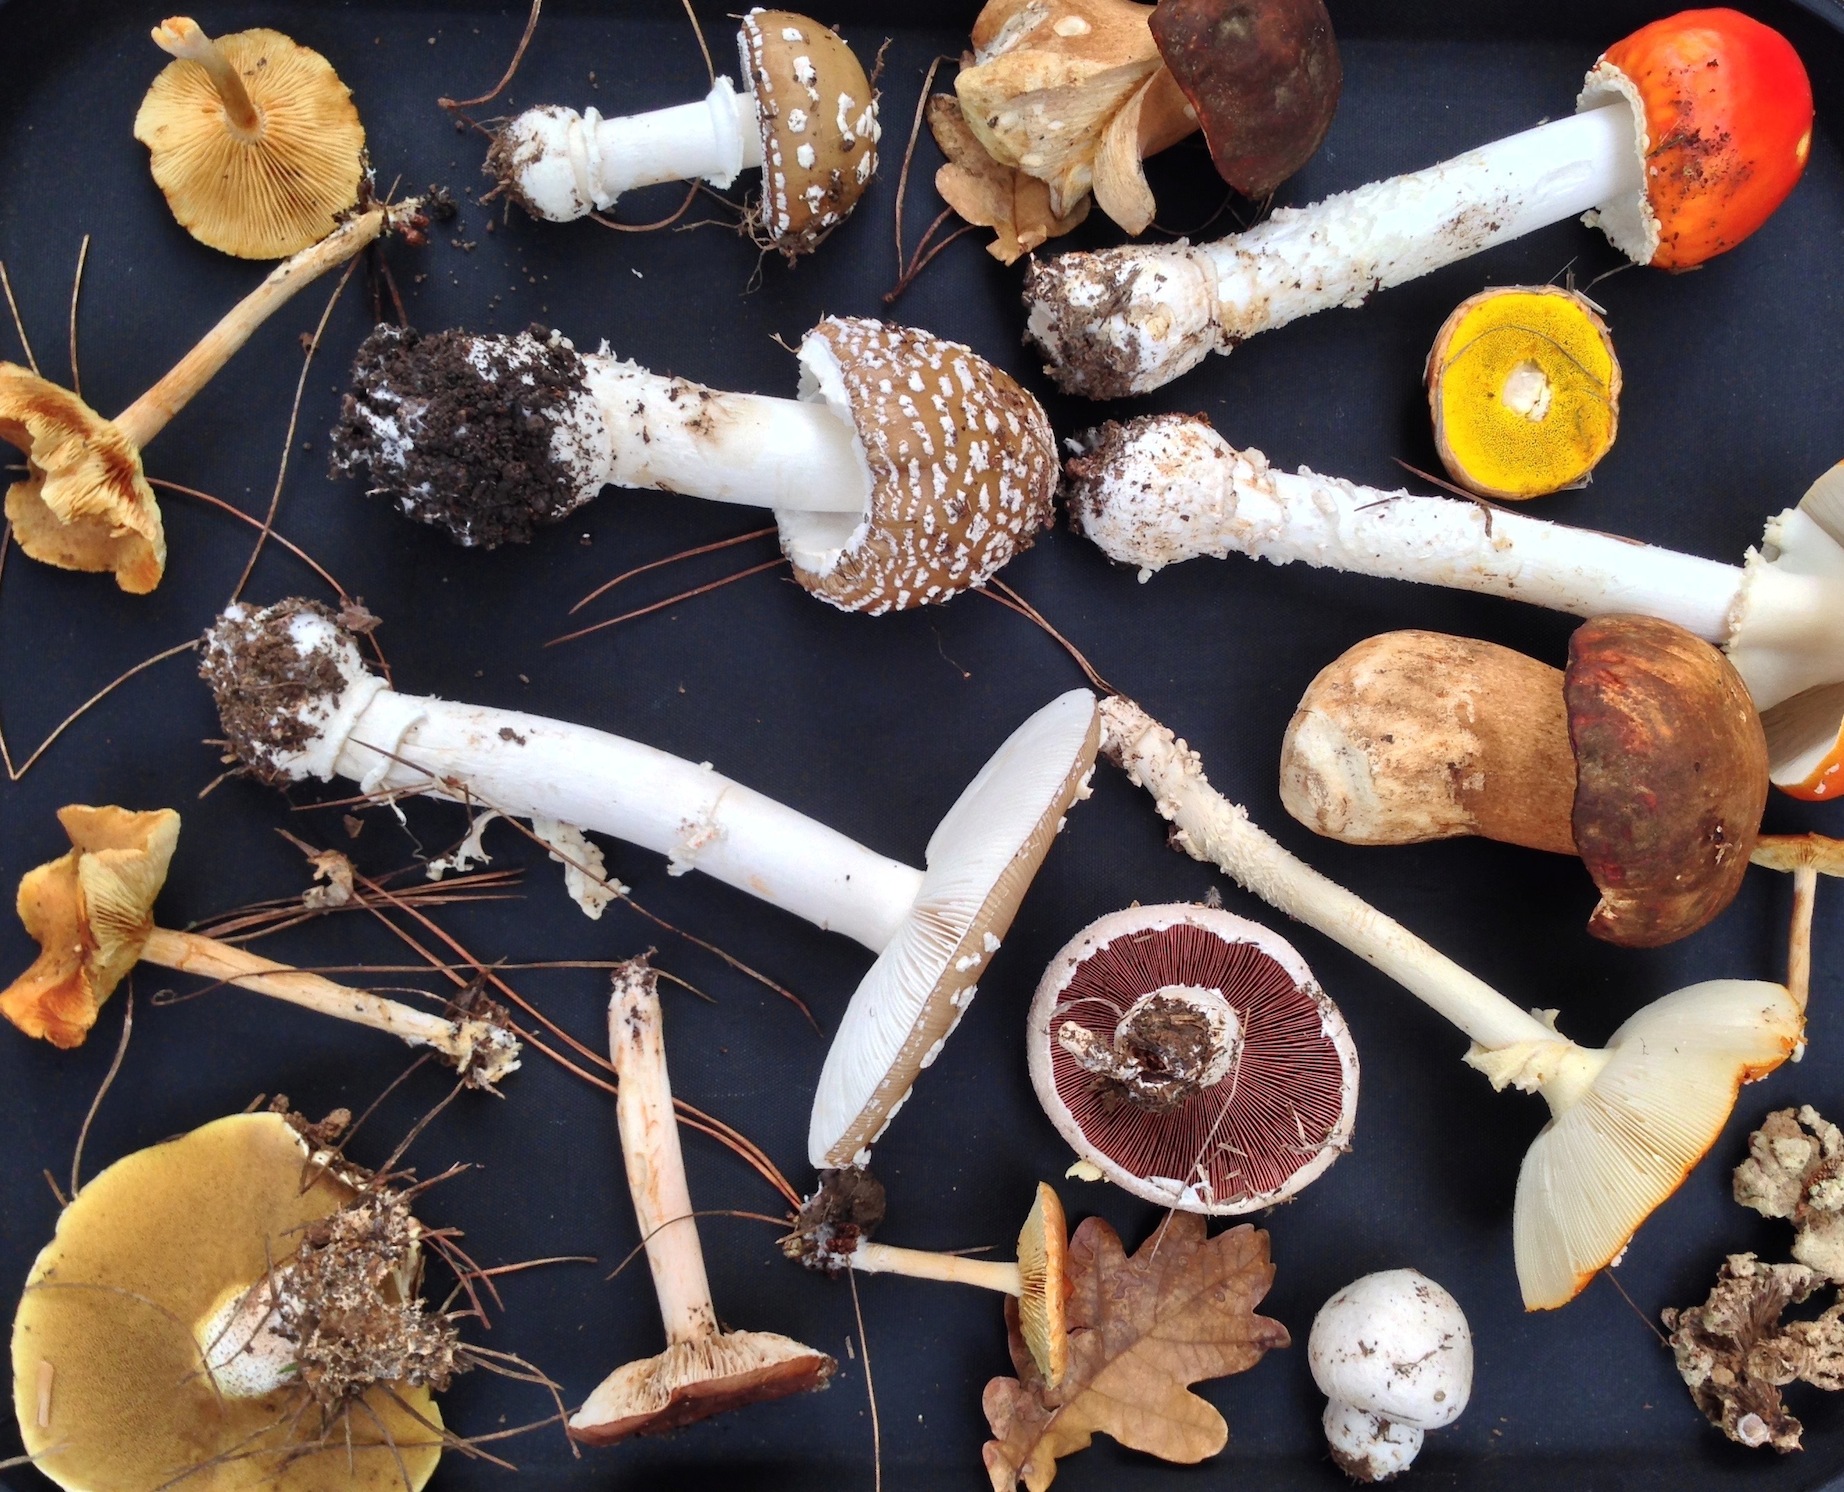 Read more about the article Fungi fever at Delheim’s Mushroom Forages